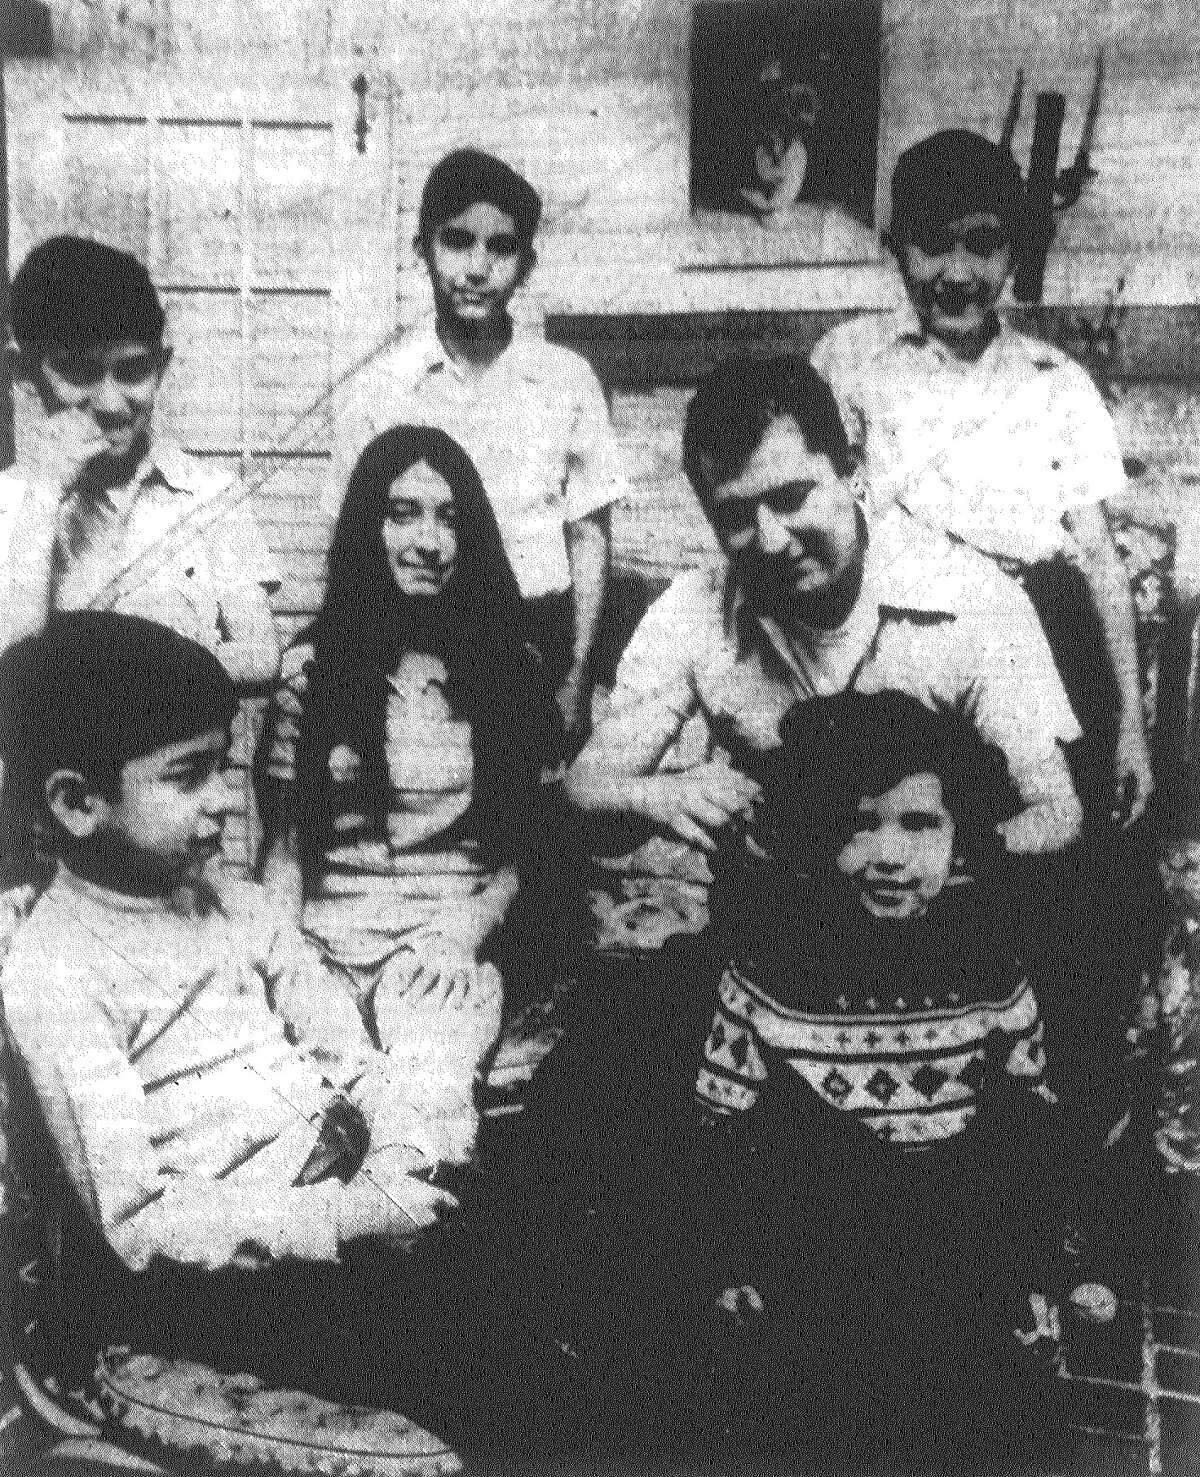 Michael Chapa Jr., a lieutenant inspector with the San Antonio Fire Department, combs daughter Leticia's hair, under the watchful eyes of his children Raul (foreground), Cynthia (next to Chapa), Frank (rear, from left), Gabriel and Michael. Chapa's wife, Virginia, died Dec. 21 in childbirth with the couple's seventh child. Christmas "went on as usual" for the family. "I told the kids their mother would have wanted it that way," Chapa said. Published in the San Antonio Light Jan. 1, 1973.